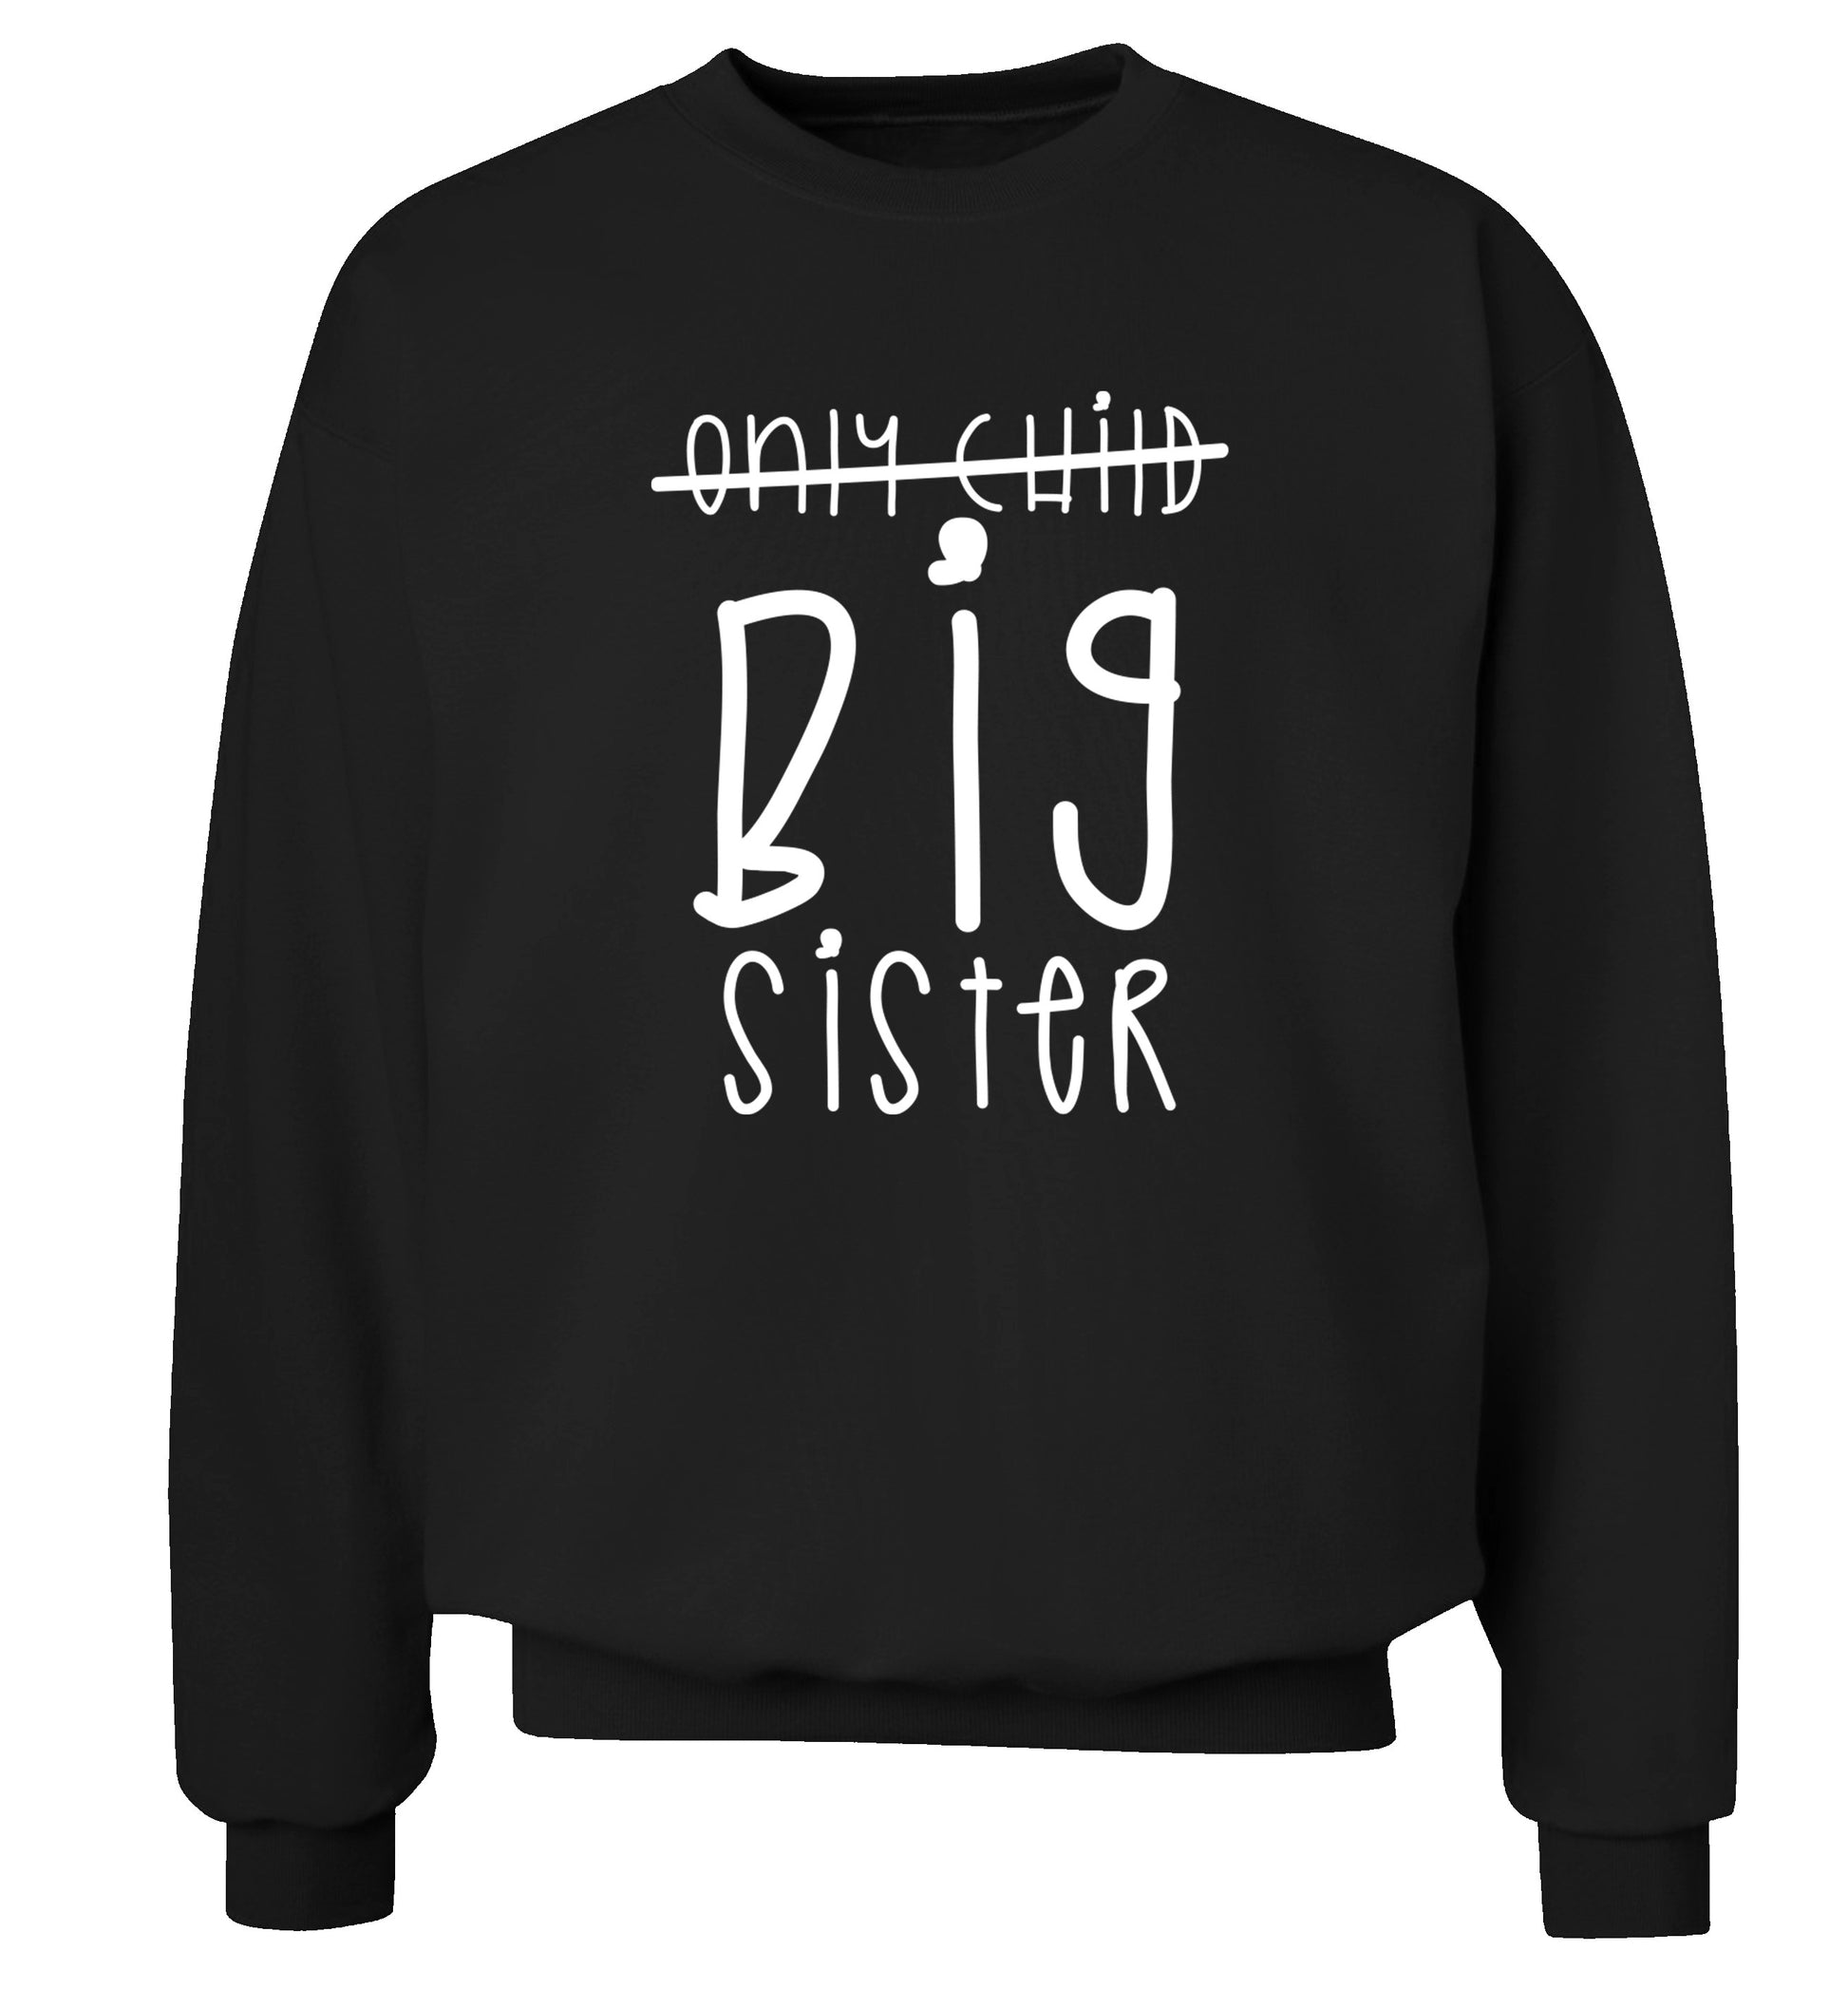 Only child big sister Adult's unisex black Sweater 2XL